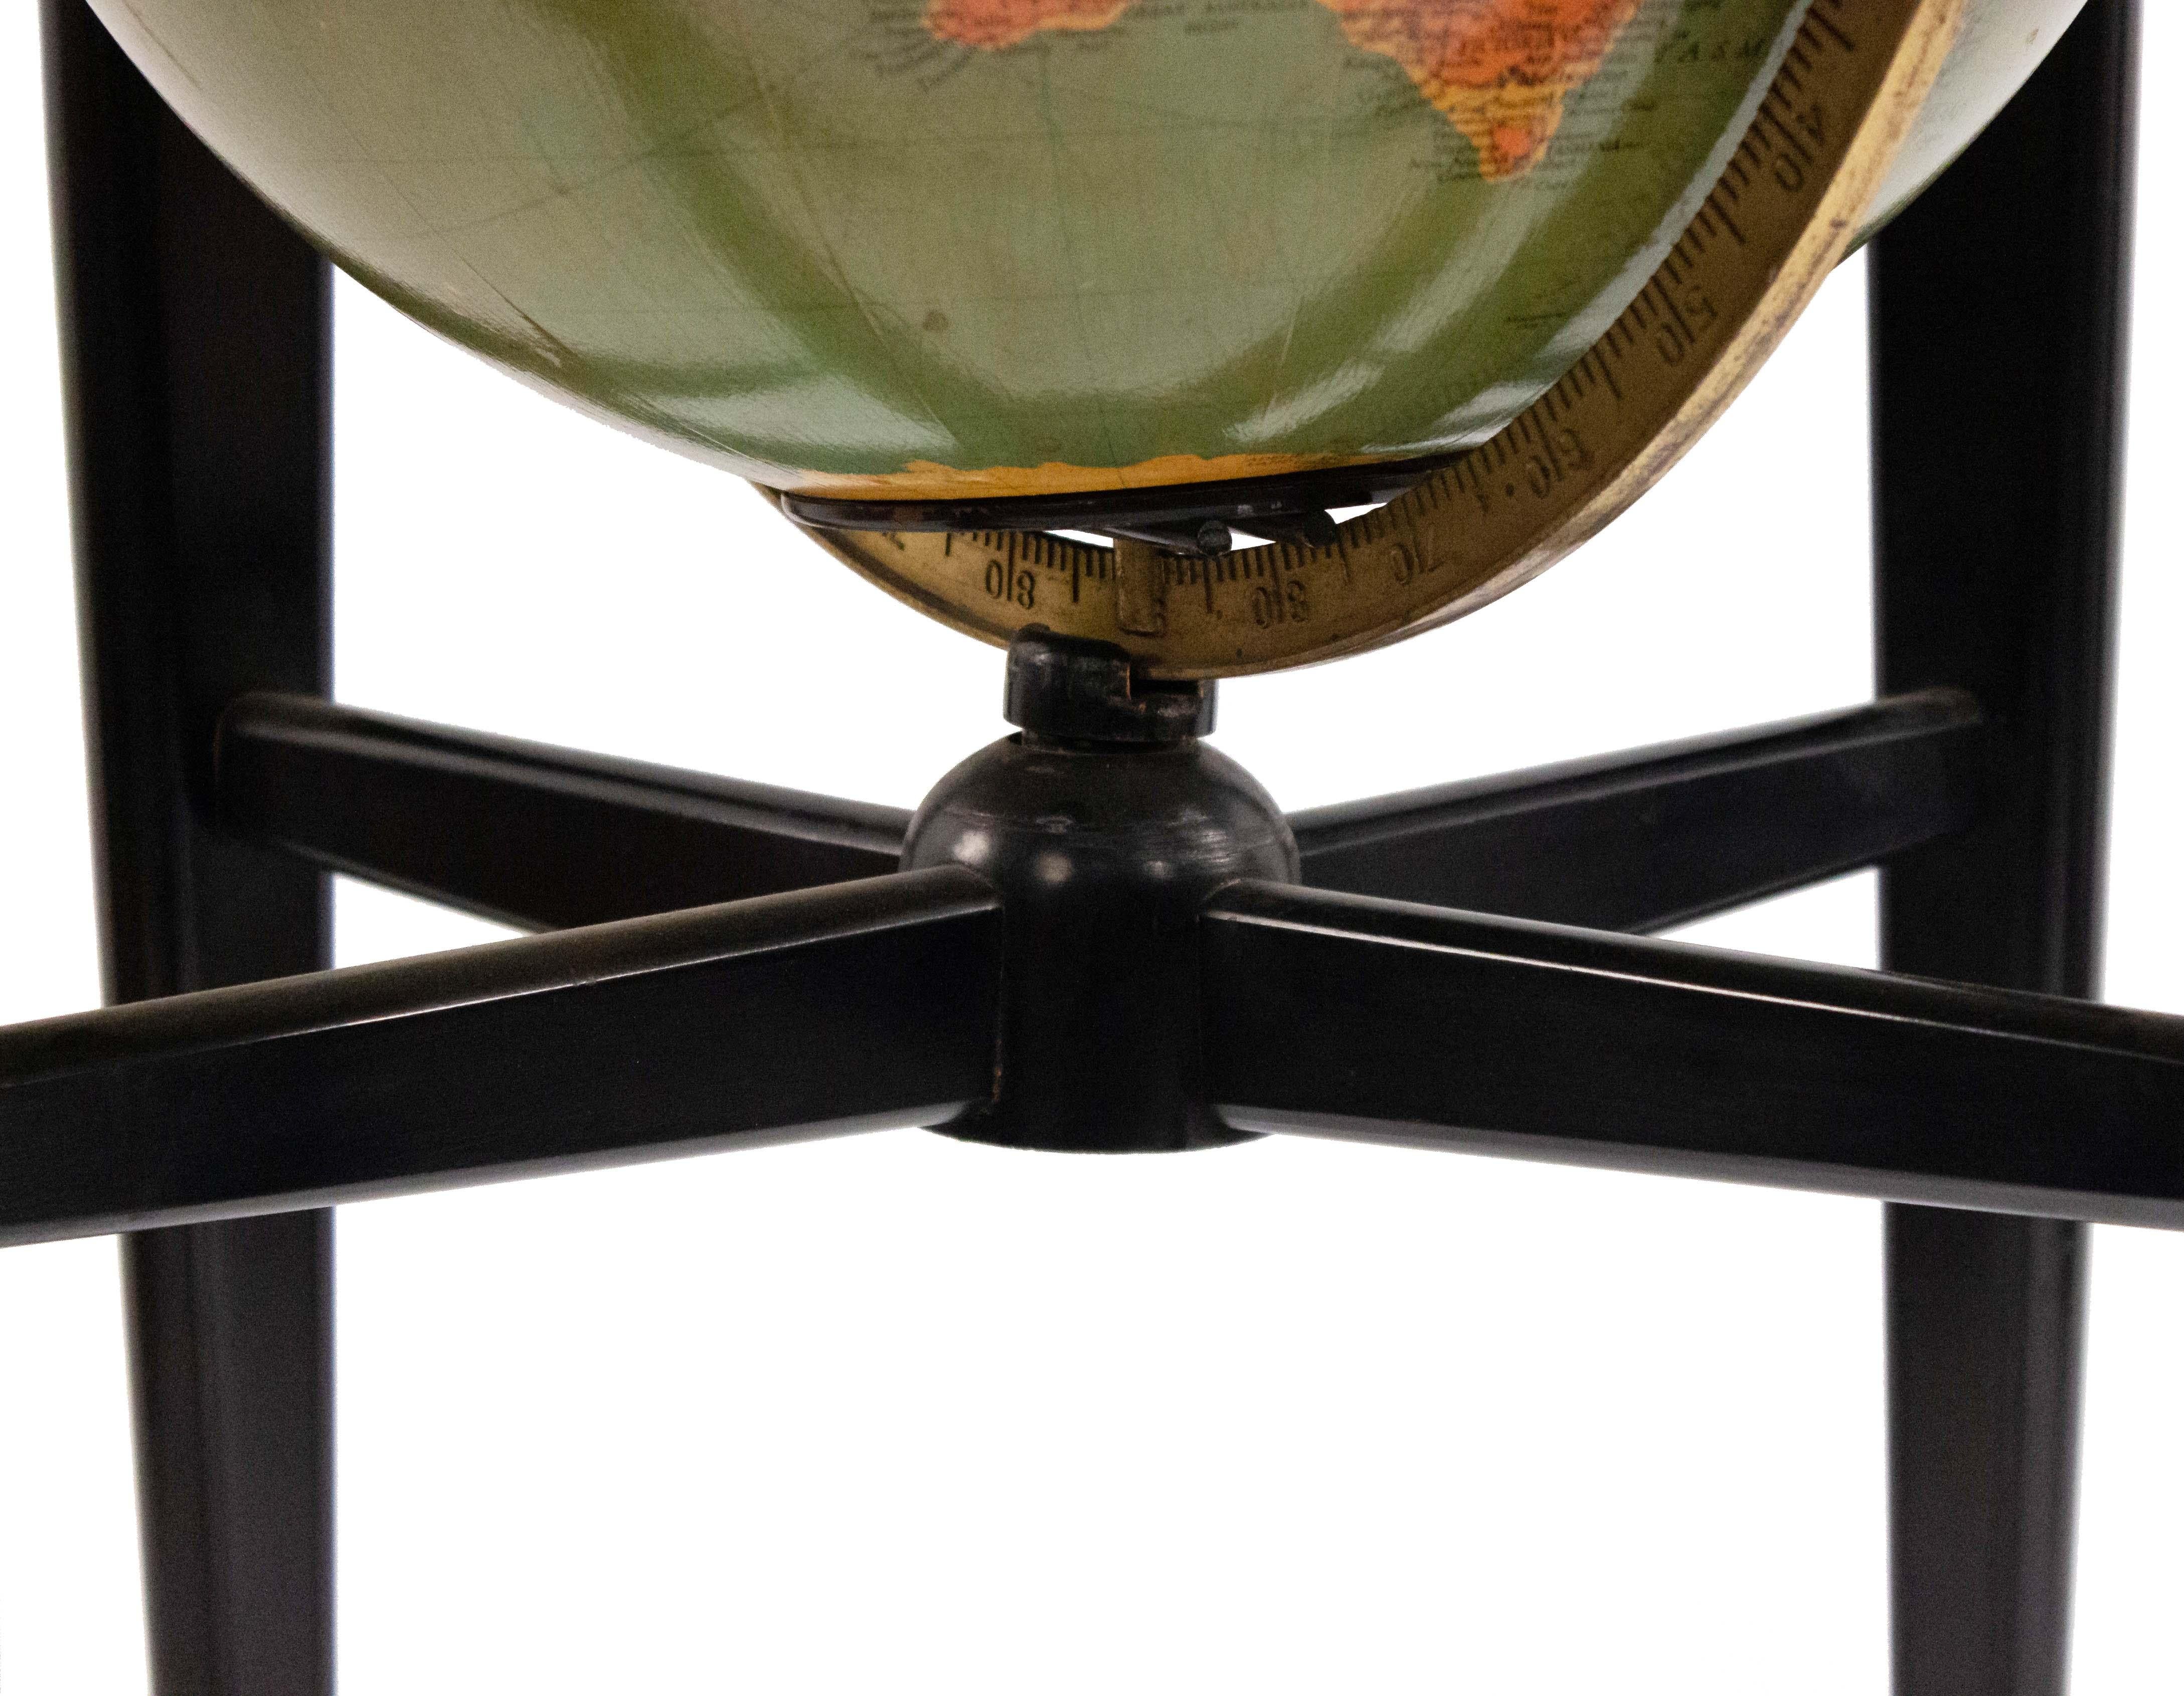 American Art Deco 'Pre-WWII' Globe of the World with an Internal Light In Good Condition For Sale In New York, NY